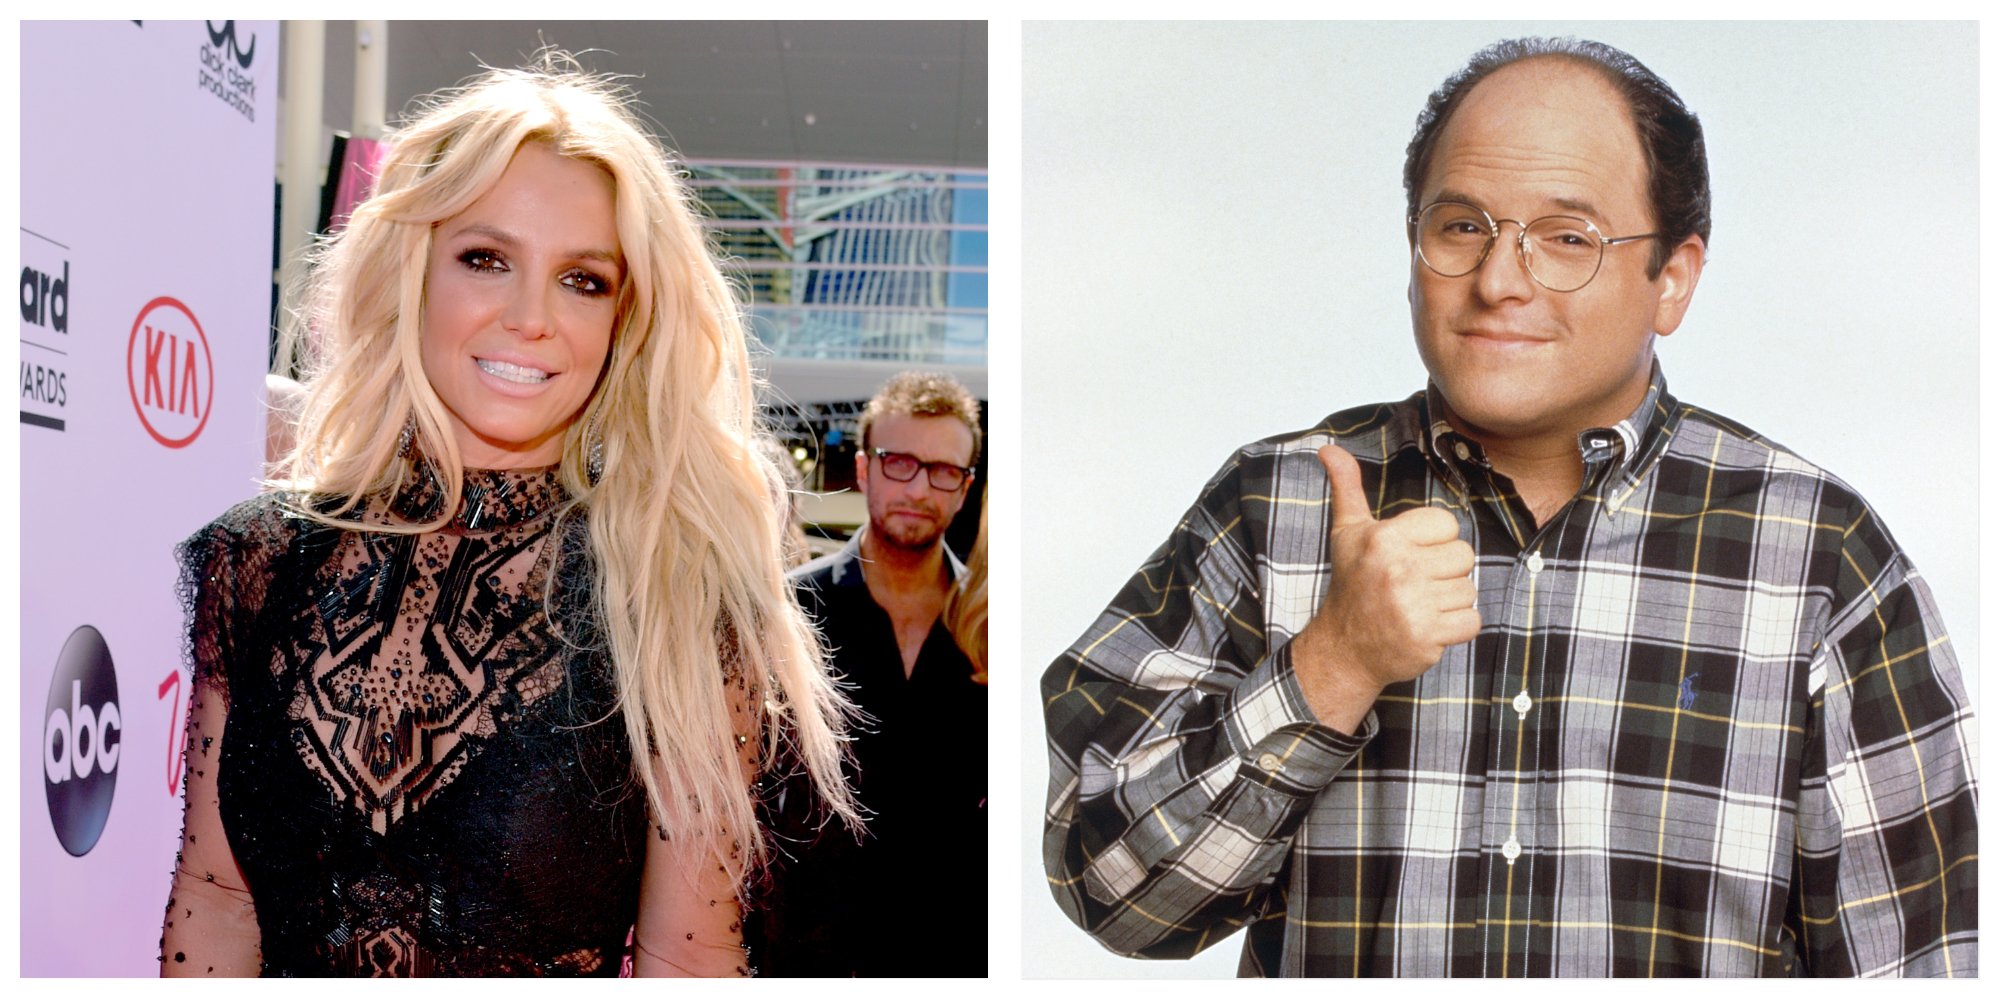 Britney Spears attended the Billboard Music Awards in 2016. Jason Alexander poses for his 'Seinfeld' cast photo as George Costanza. 